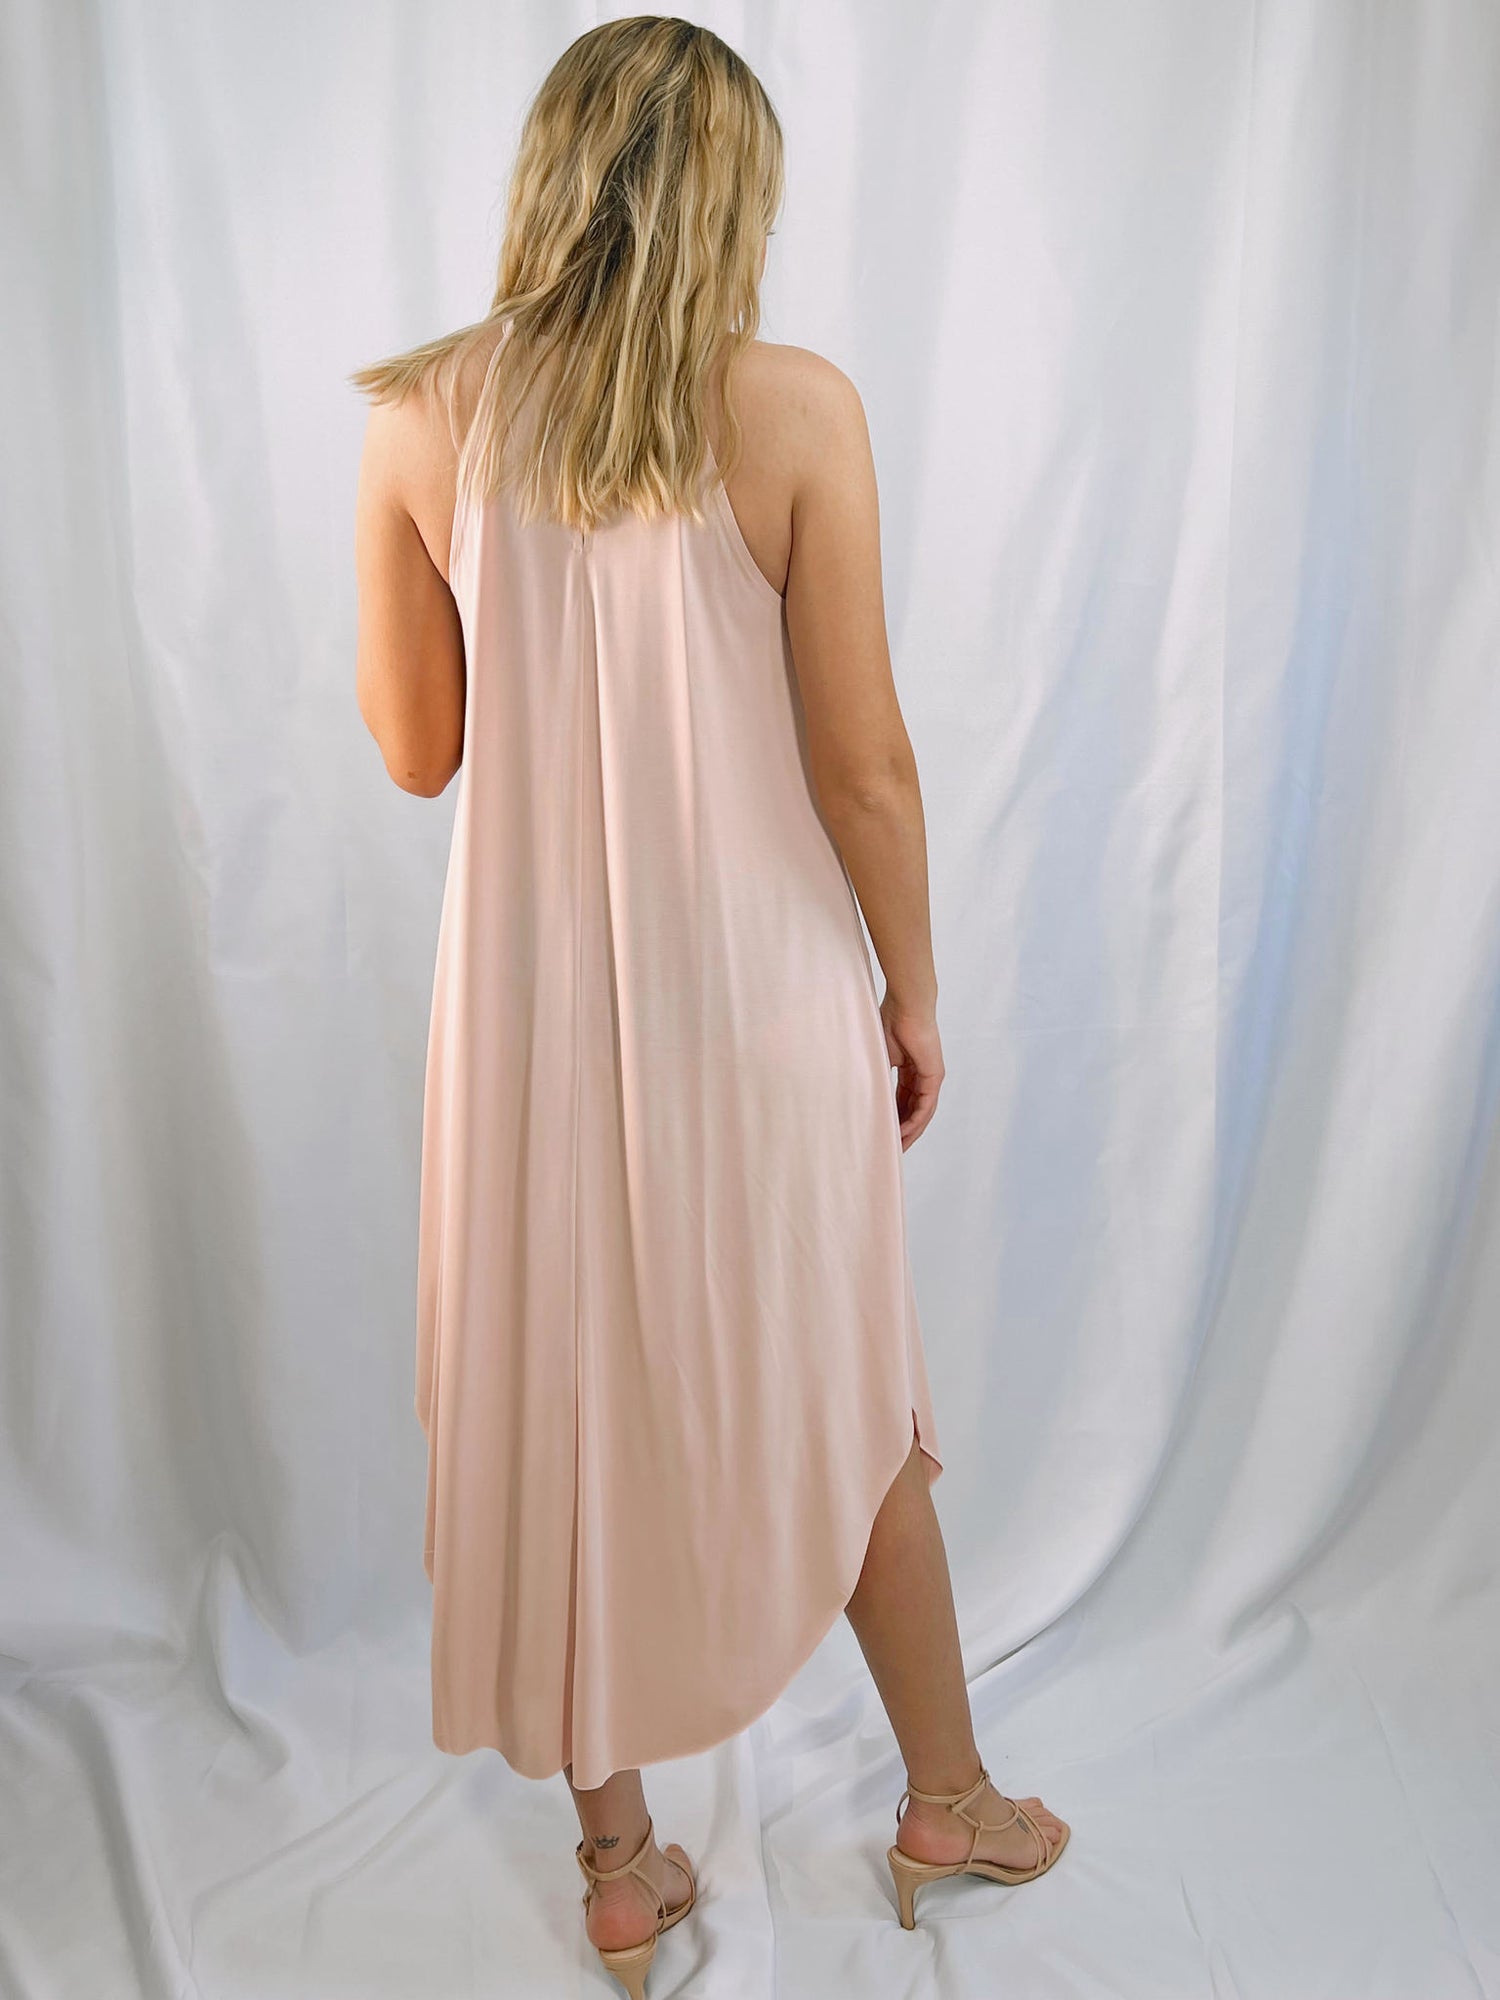 pastel pink pull over halter dress with keyhole back and a soft, swing fit trapeze style